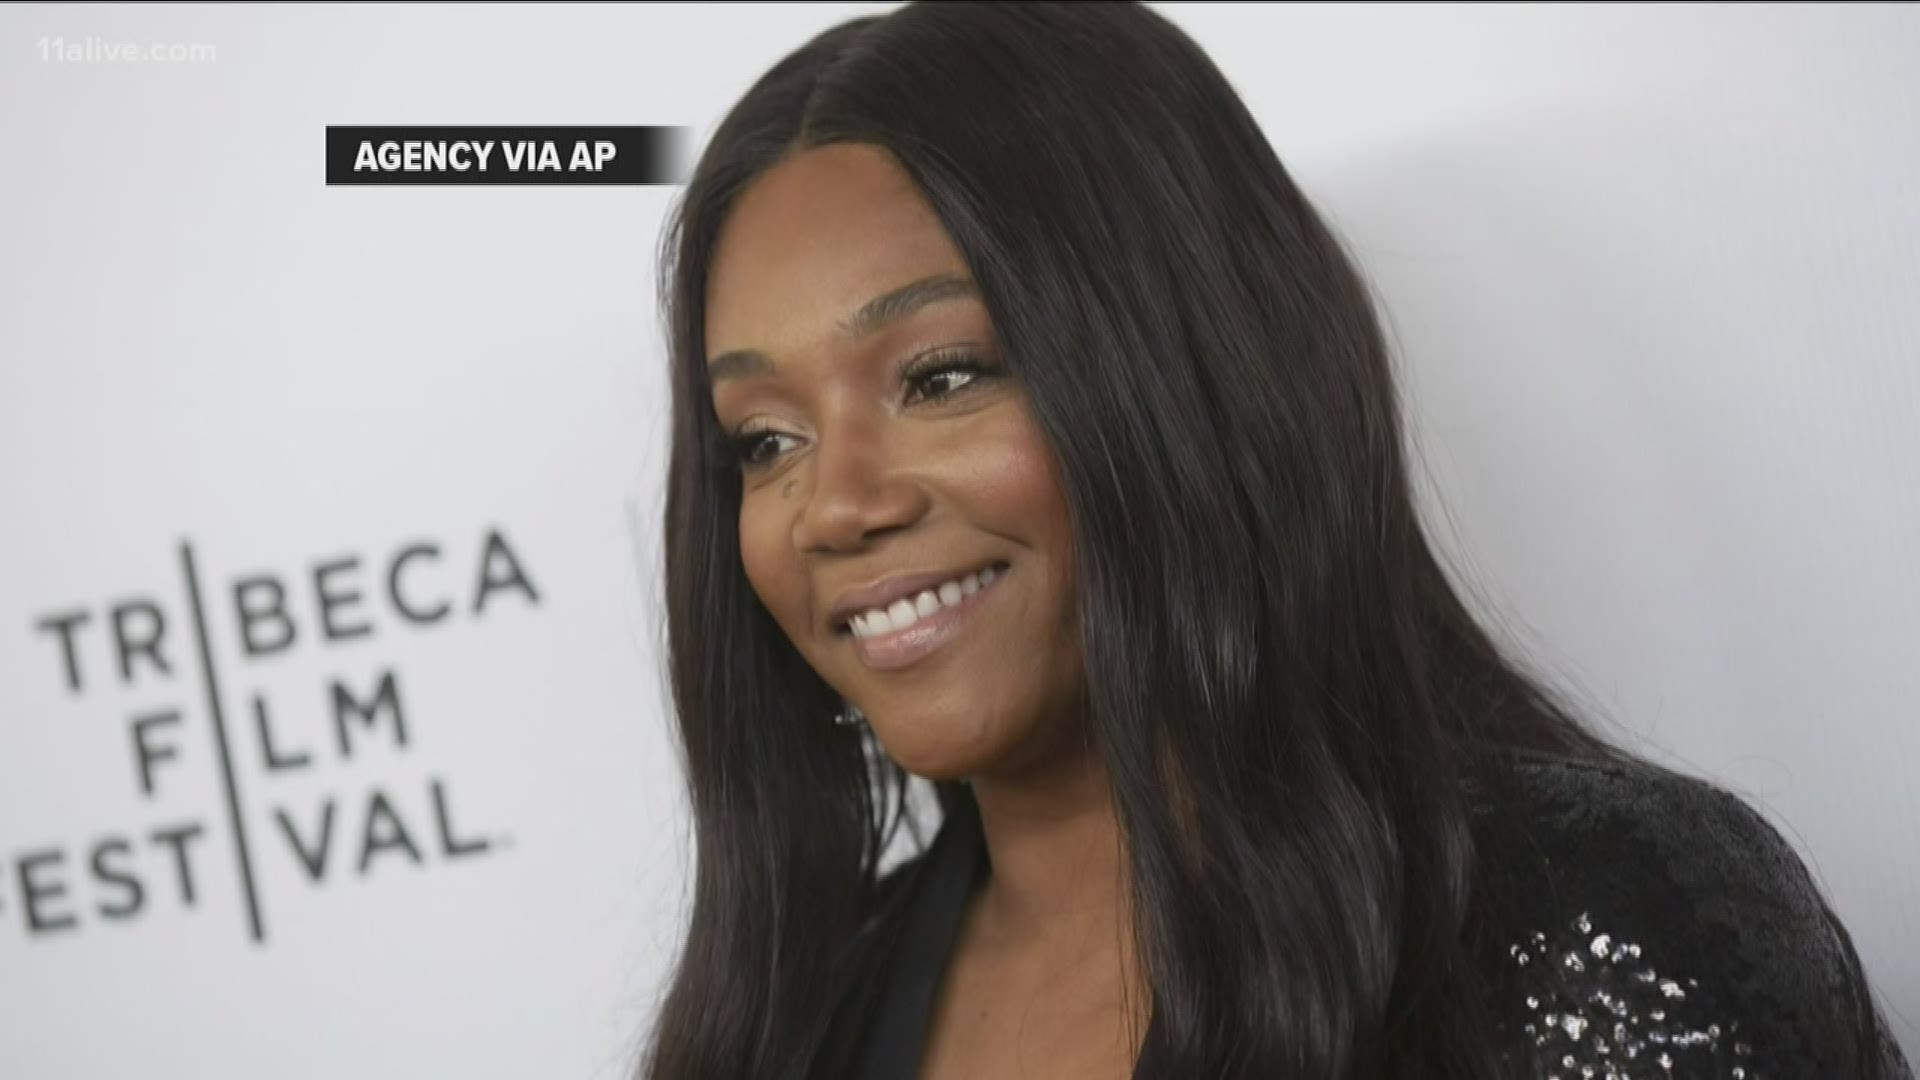 Haddish was set to take the stage at the Fox Theatre on June 22.